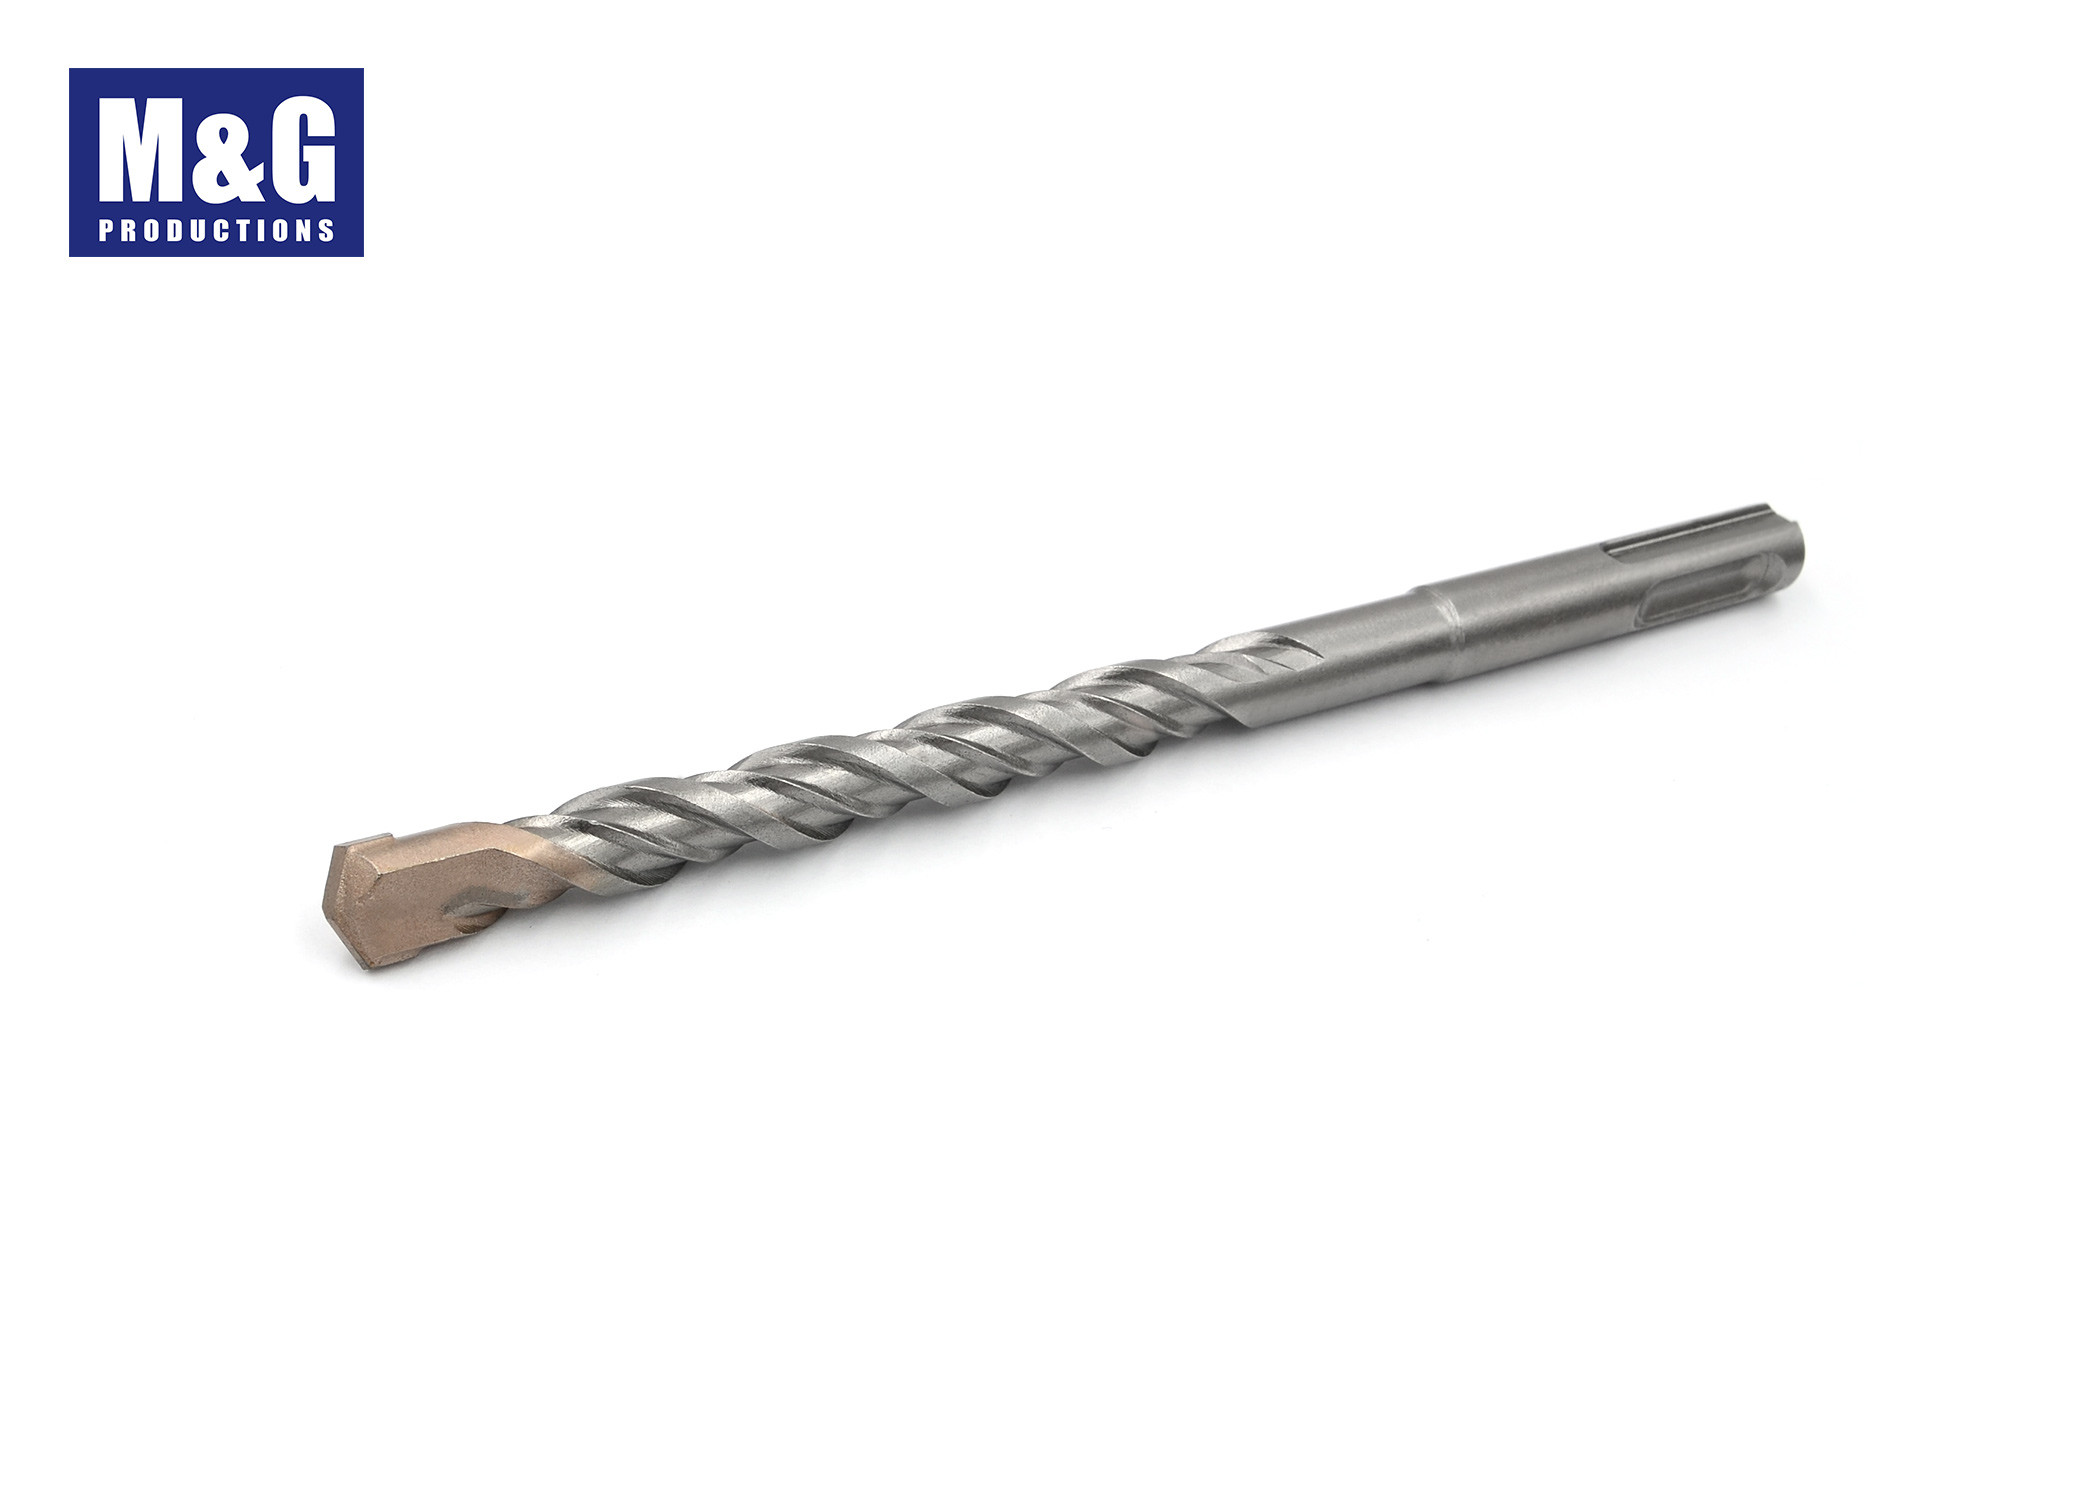 Wholesale SDS Plus Drill Bit High Performance Solid Carbide tips Double Flutes from china suppliers